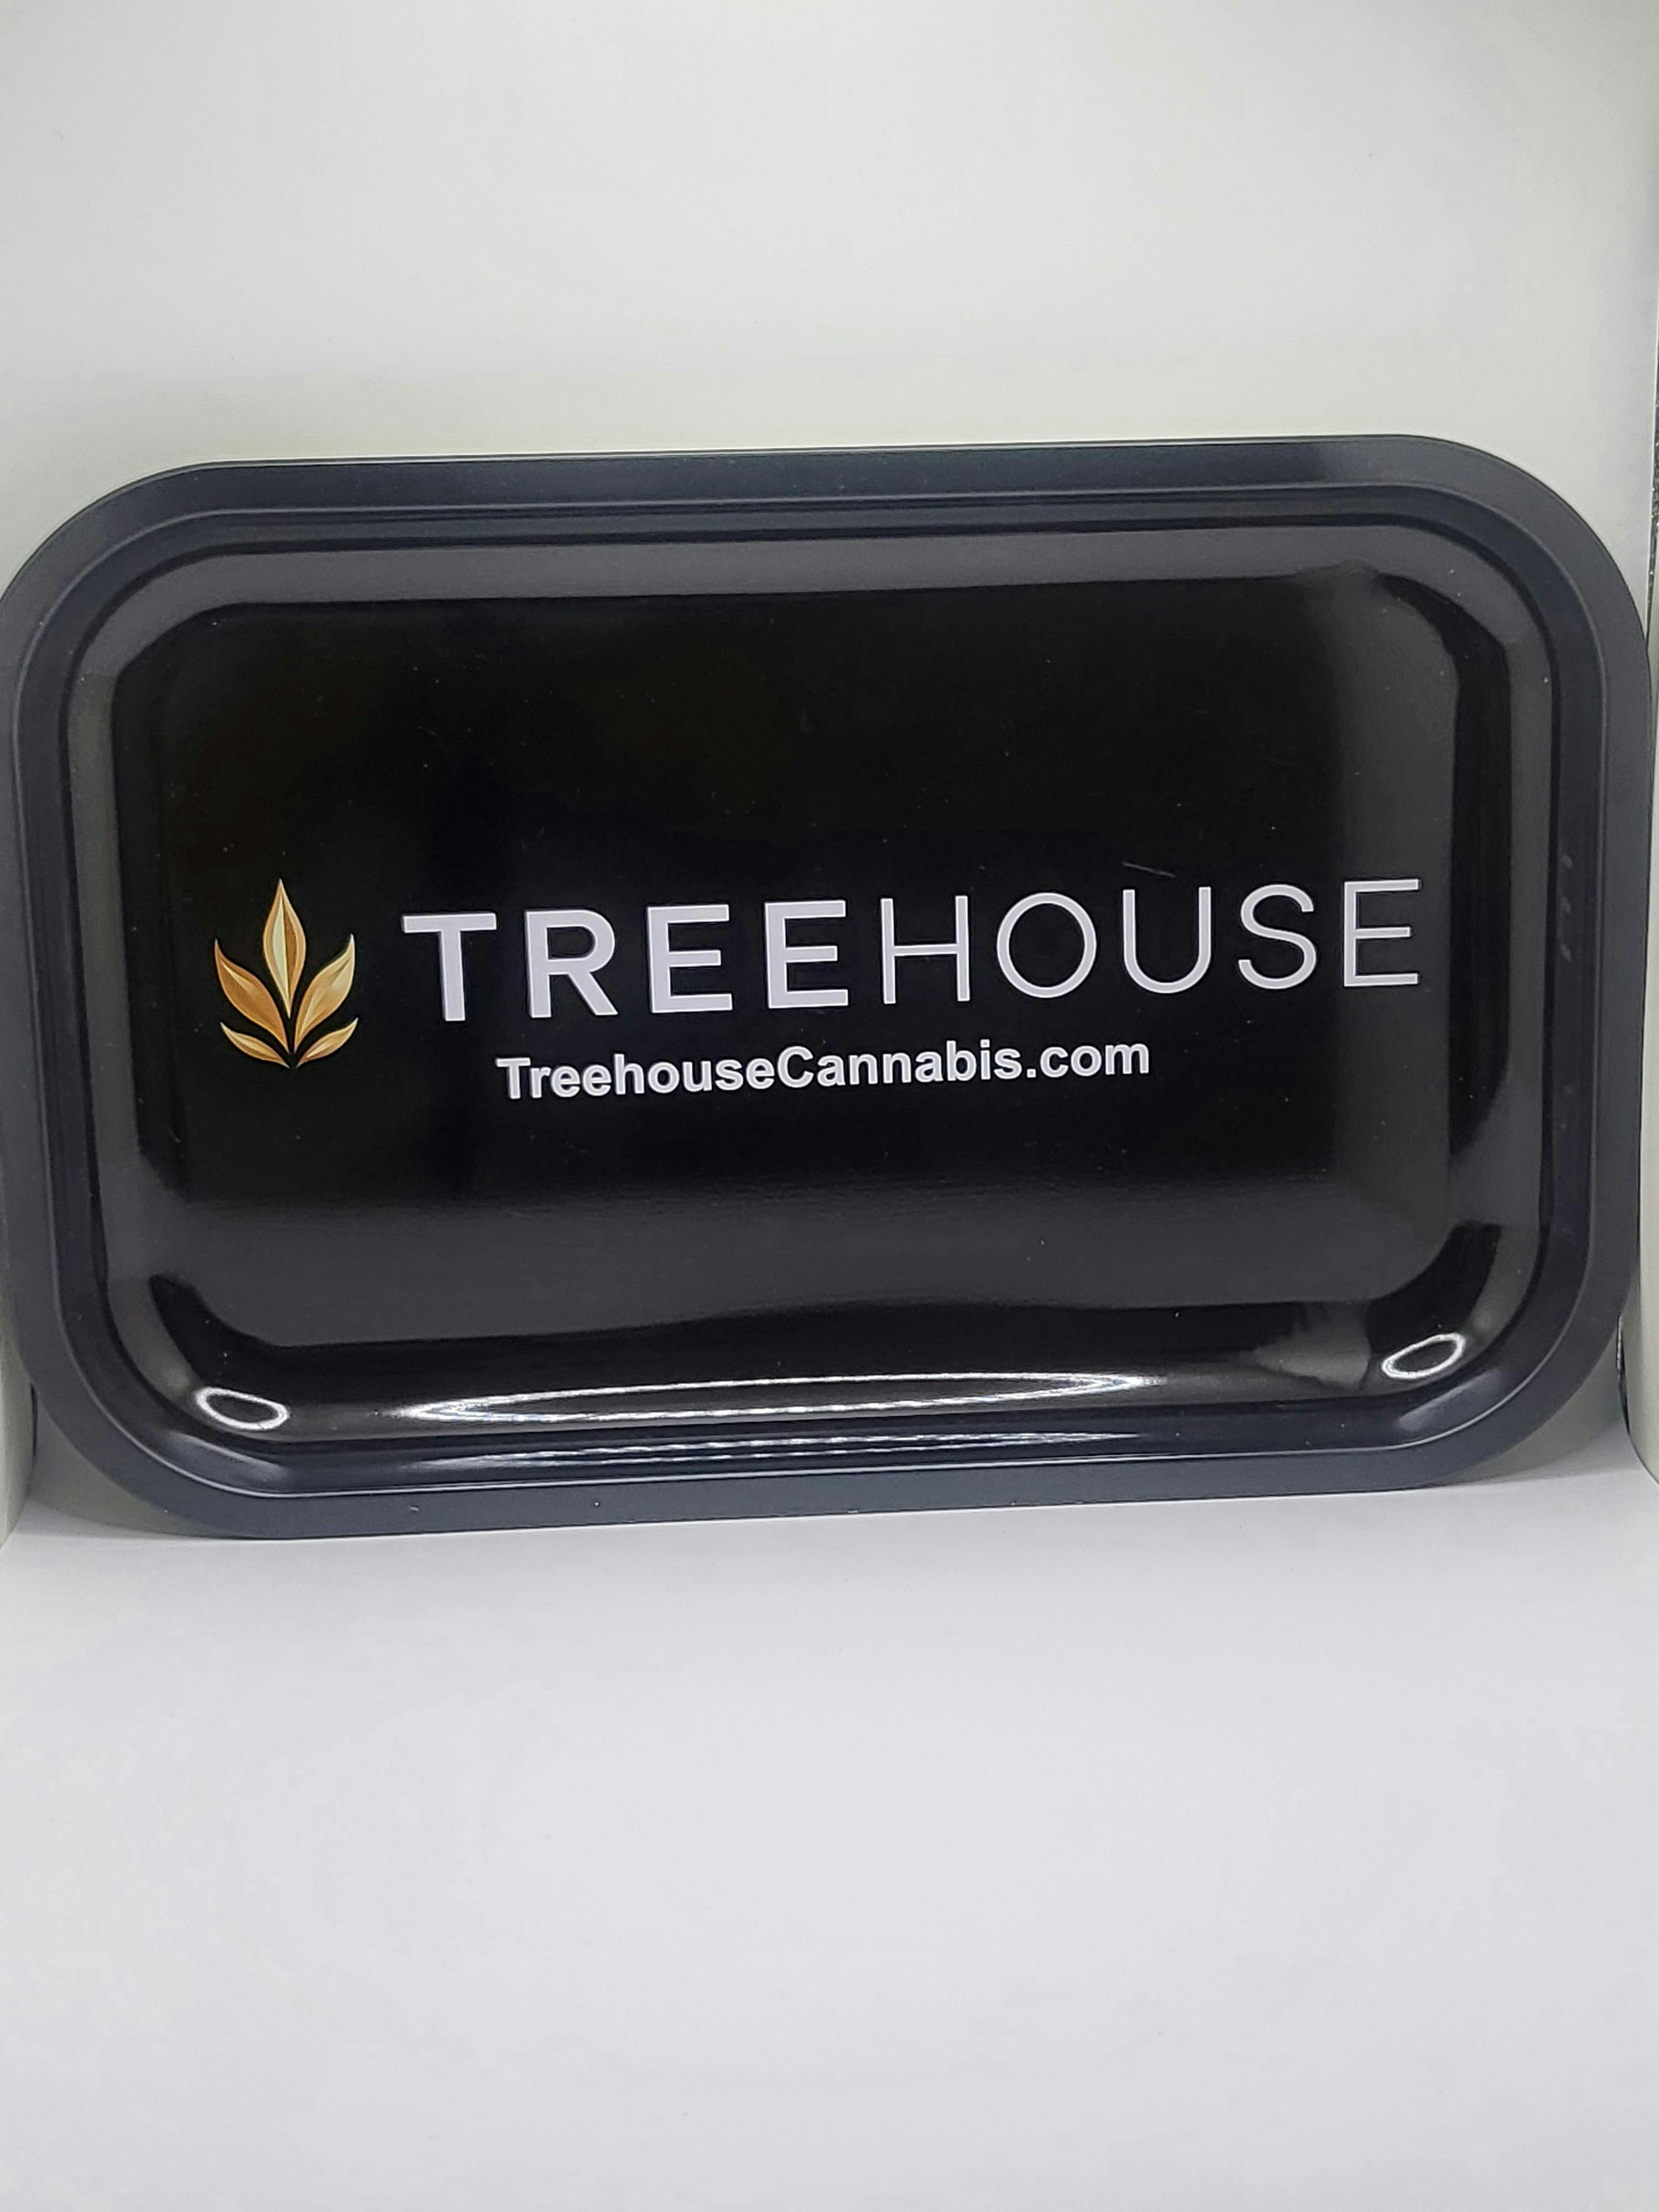 Treehouse Rolling Tray - Treehouse Cannabis - ACCESSORIES - Rockland County Weed Delivery | Treehouse Cannabis